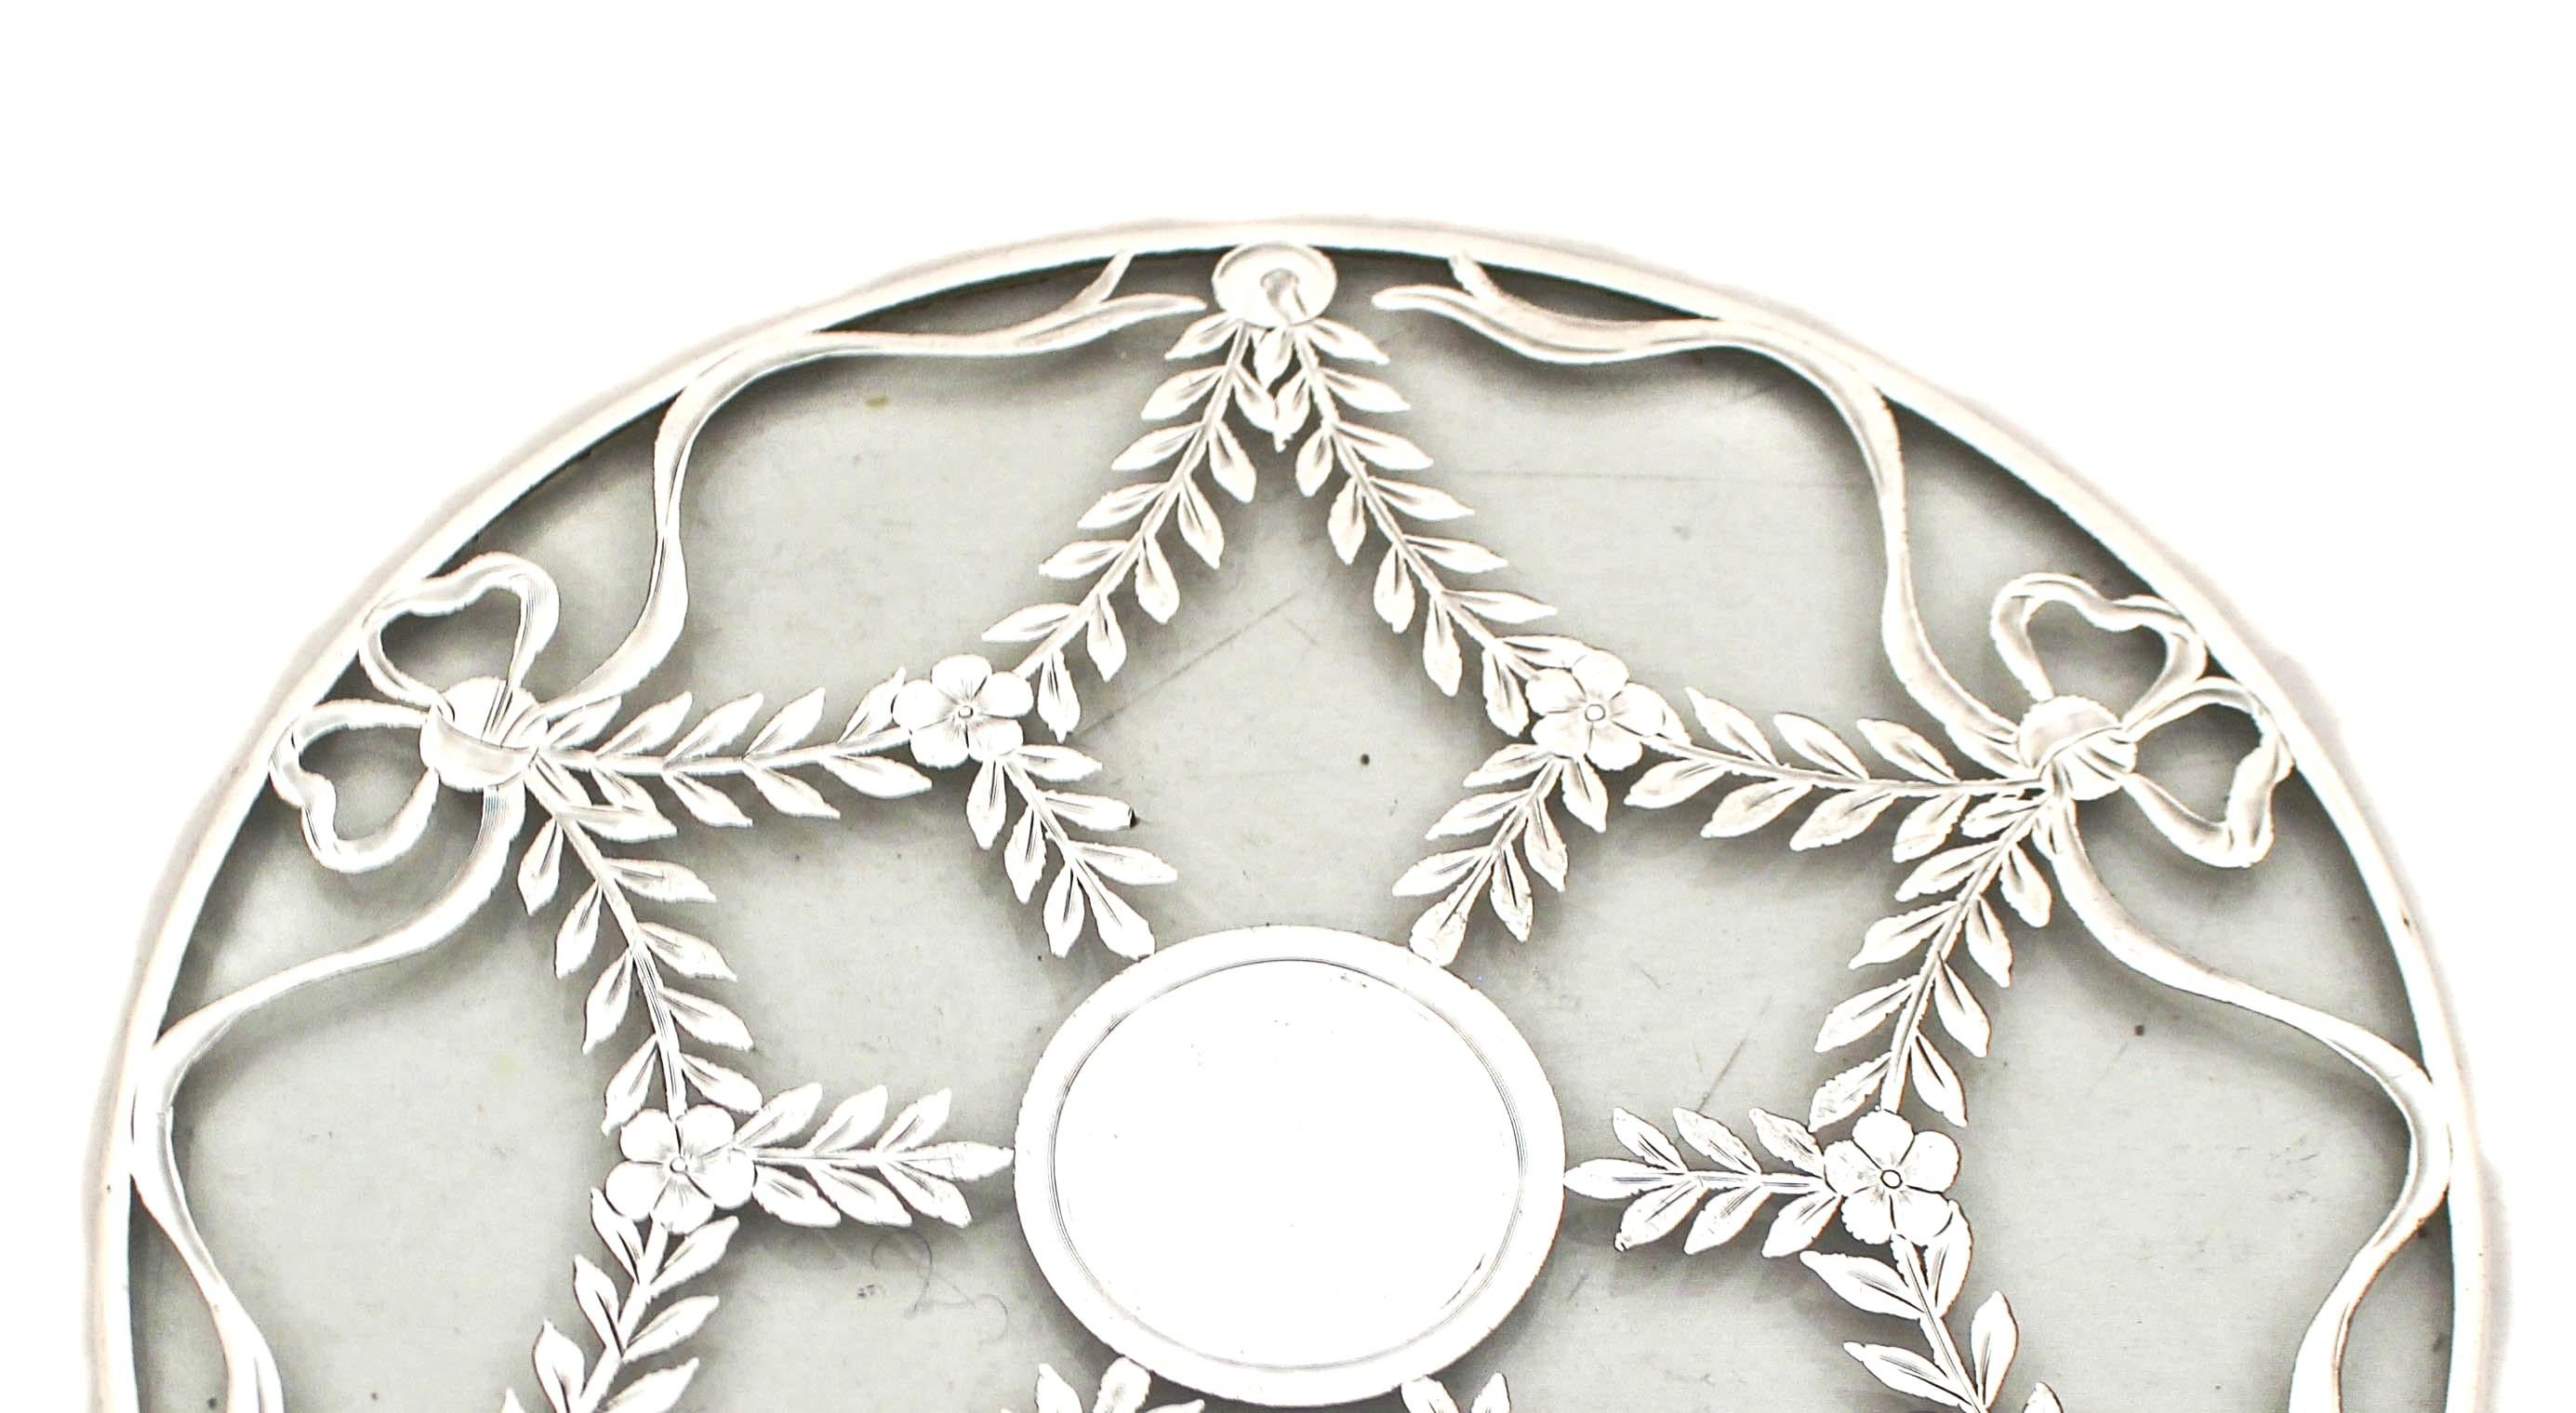 Being offered is this sterling silver trivet by Webster Silver. It has wreaths and bows decorating the top with a round cartouche for a monogram.  A large size trivet for something bigger than the usual size.  In mint condition.